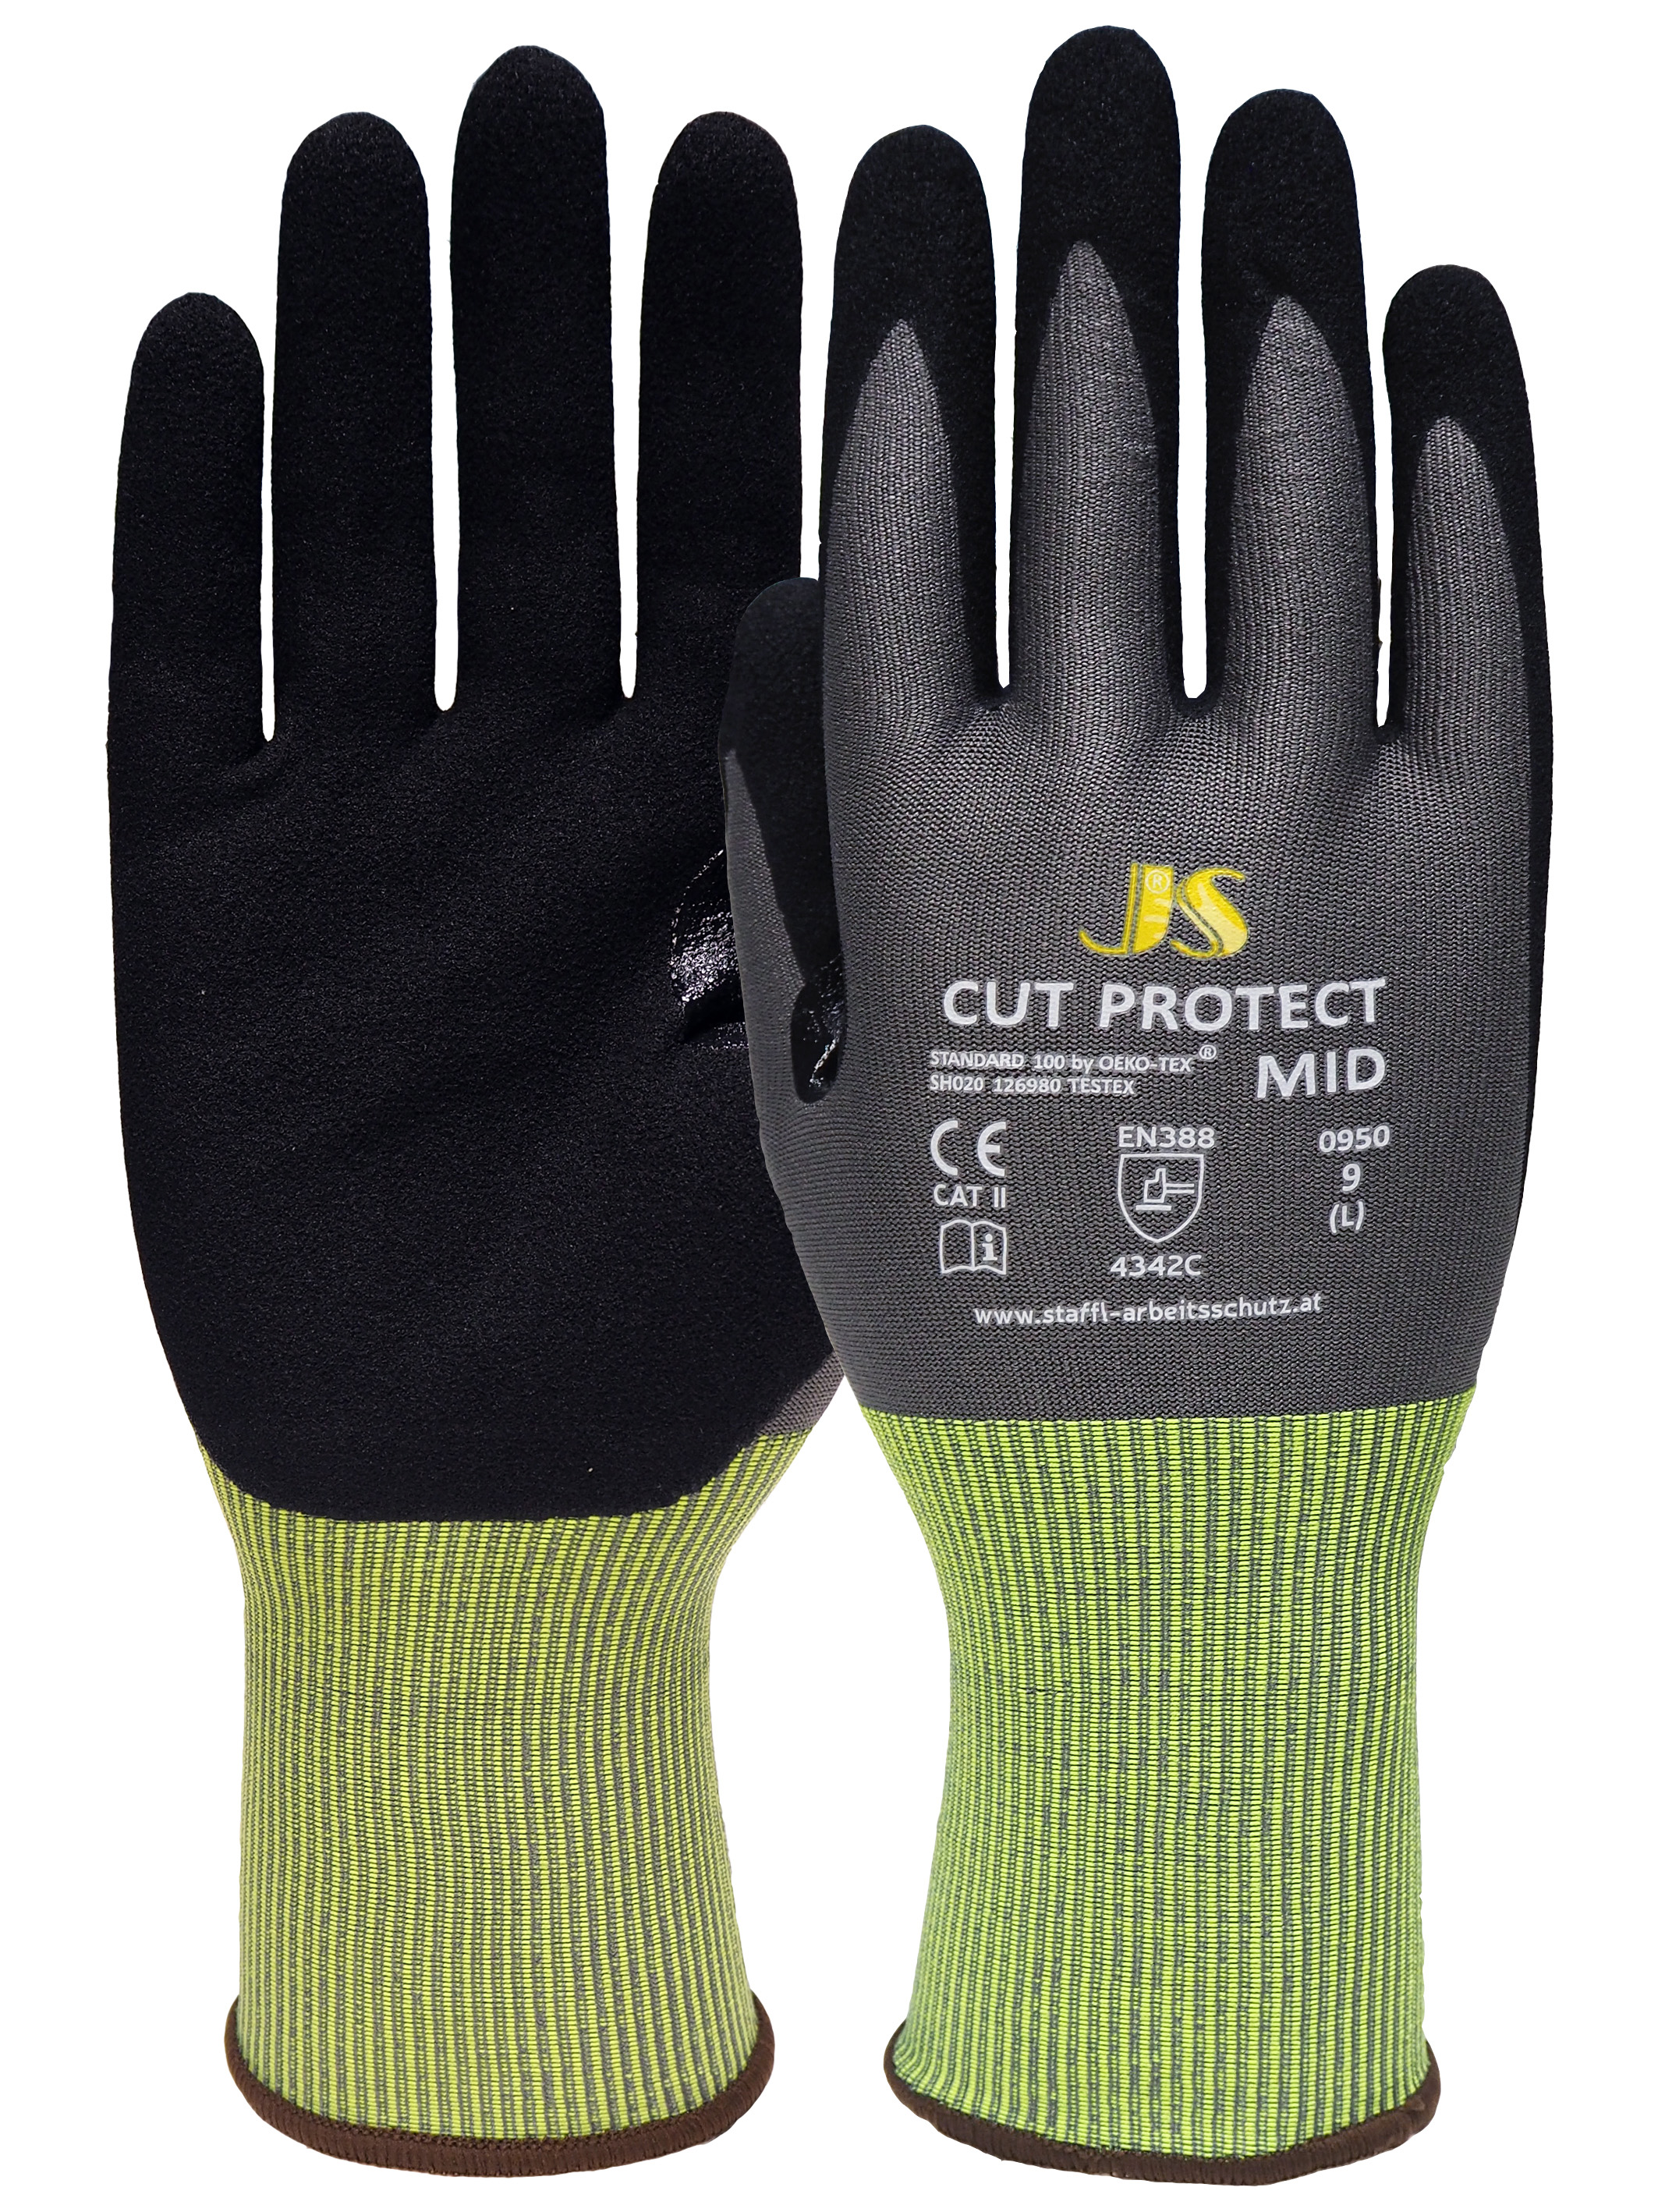 Cut Protect Mid 0950